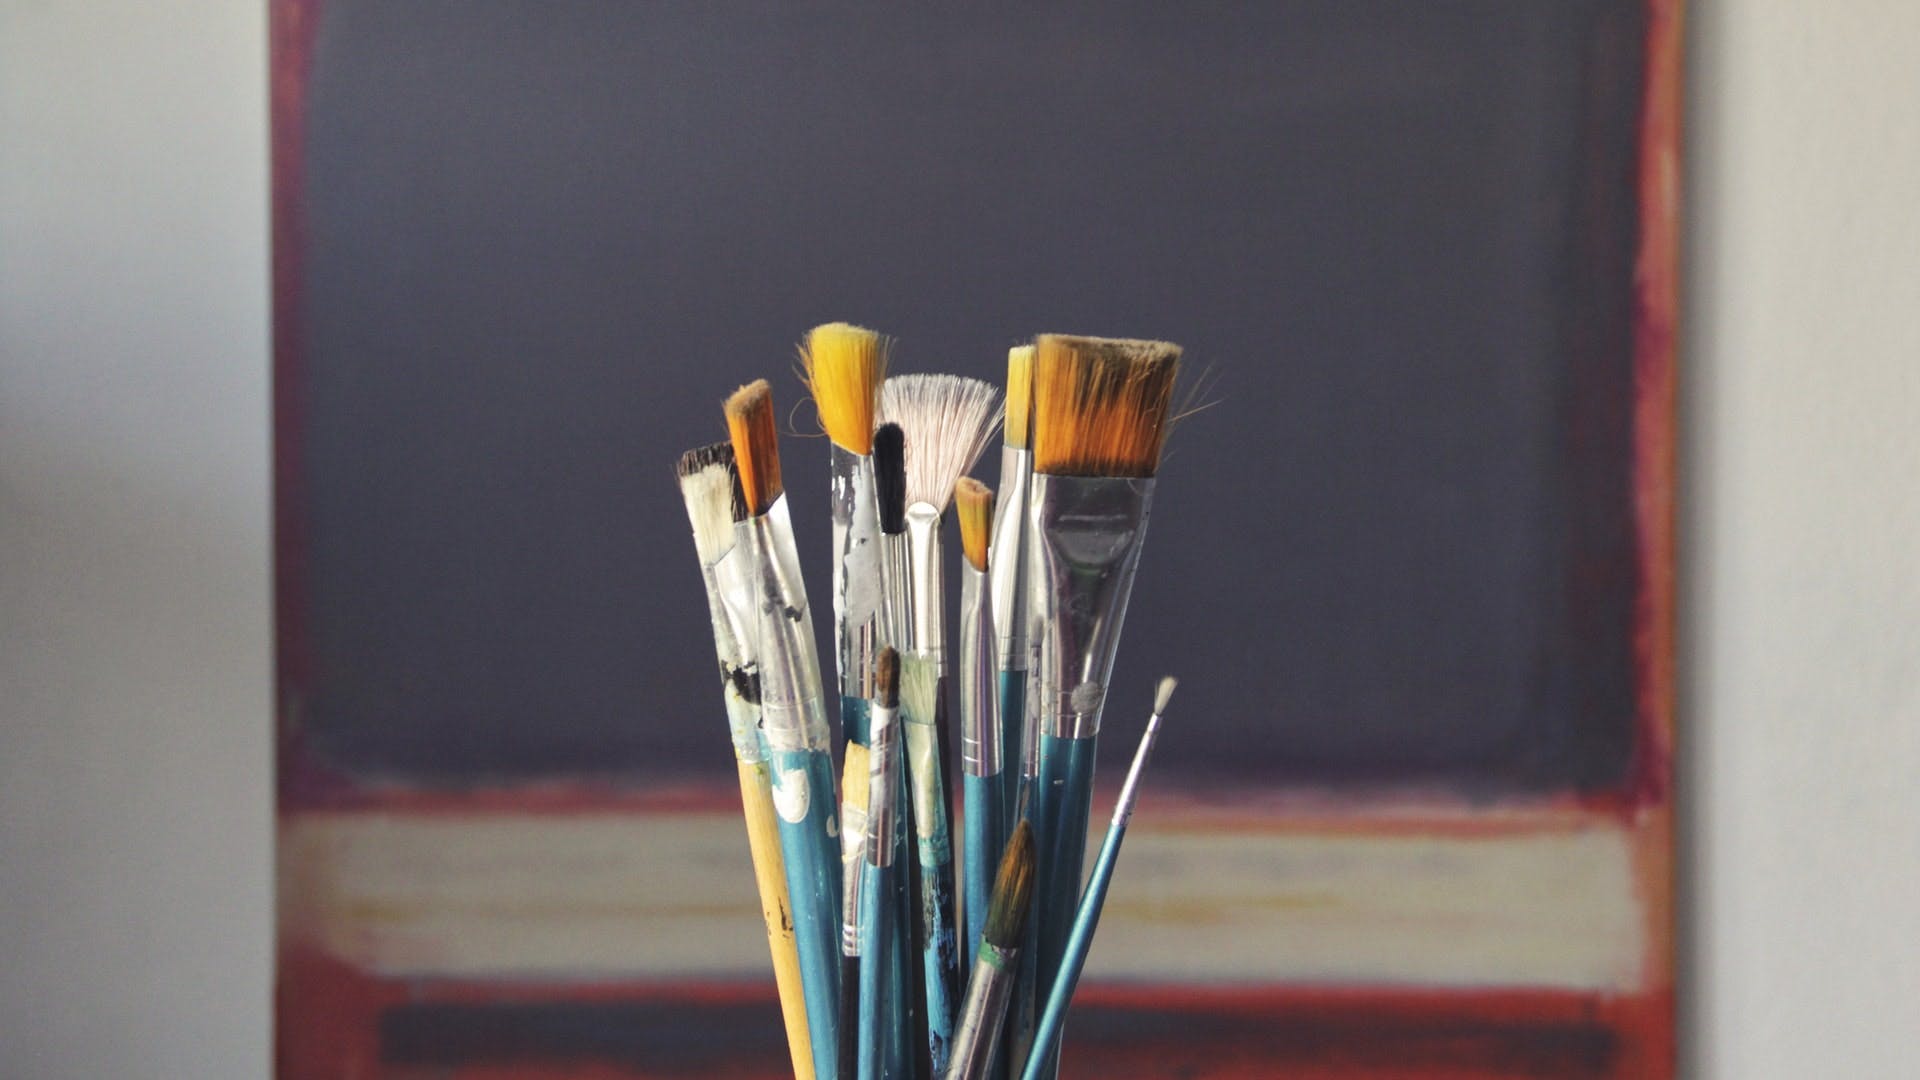 Brush,Makeup brushes,Tool,Watercolor paint,Painting,Paint,Still life photography,Office supplies,Cylinder